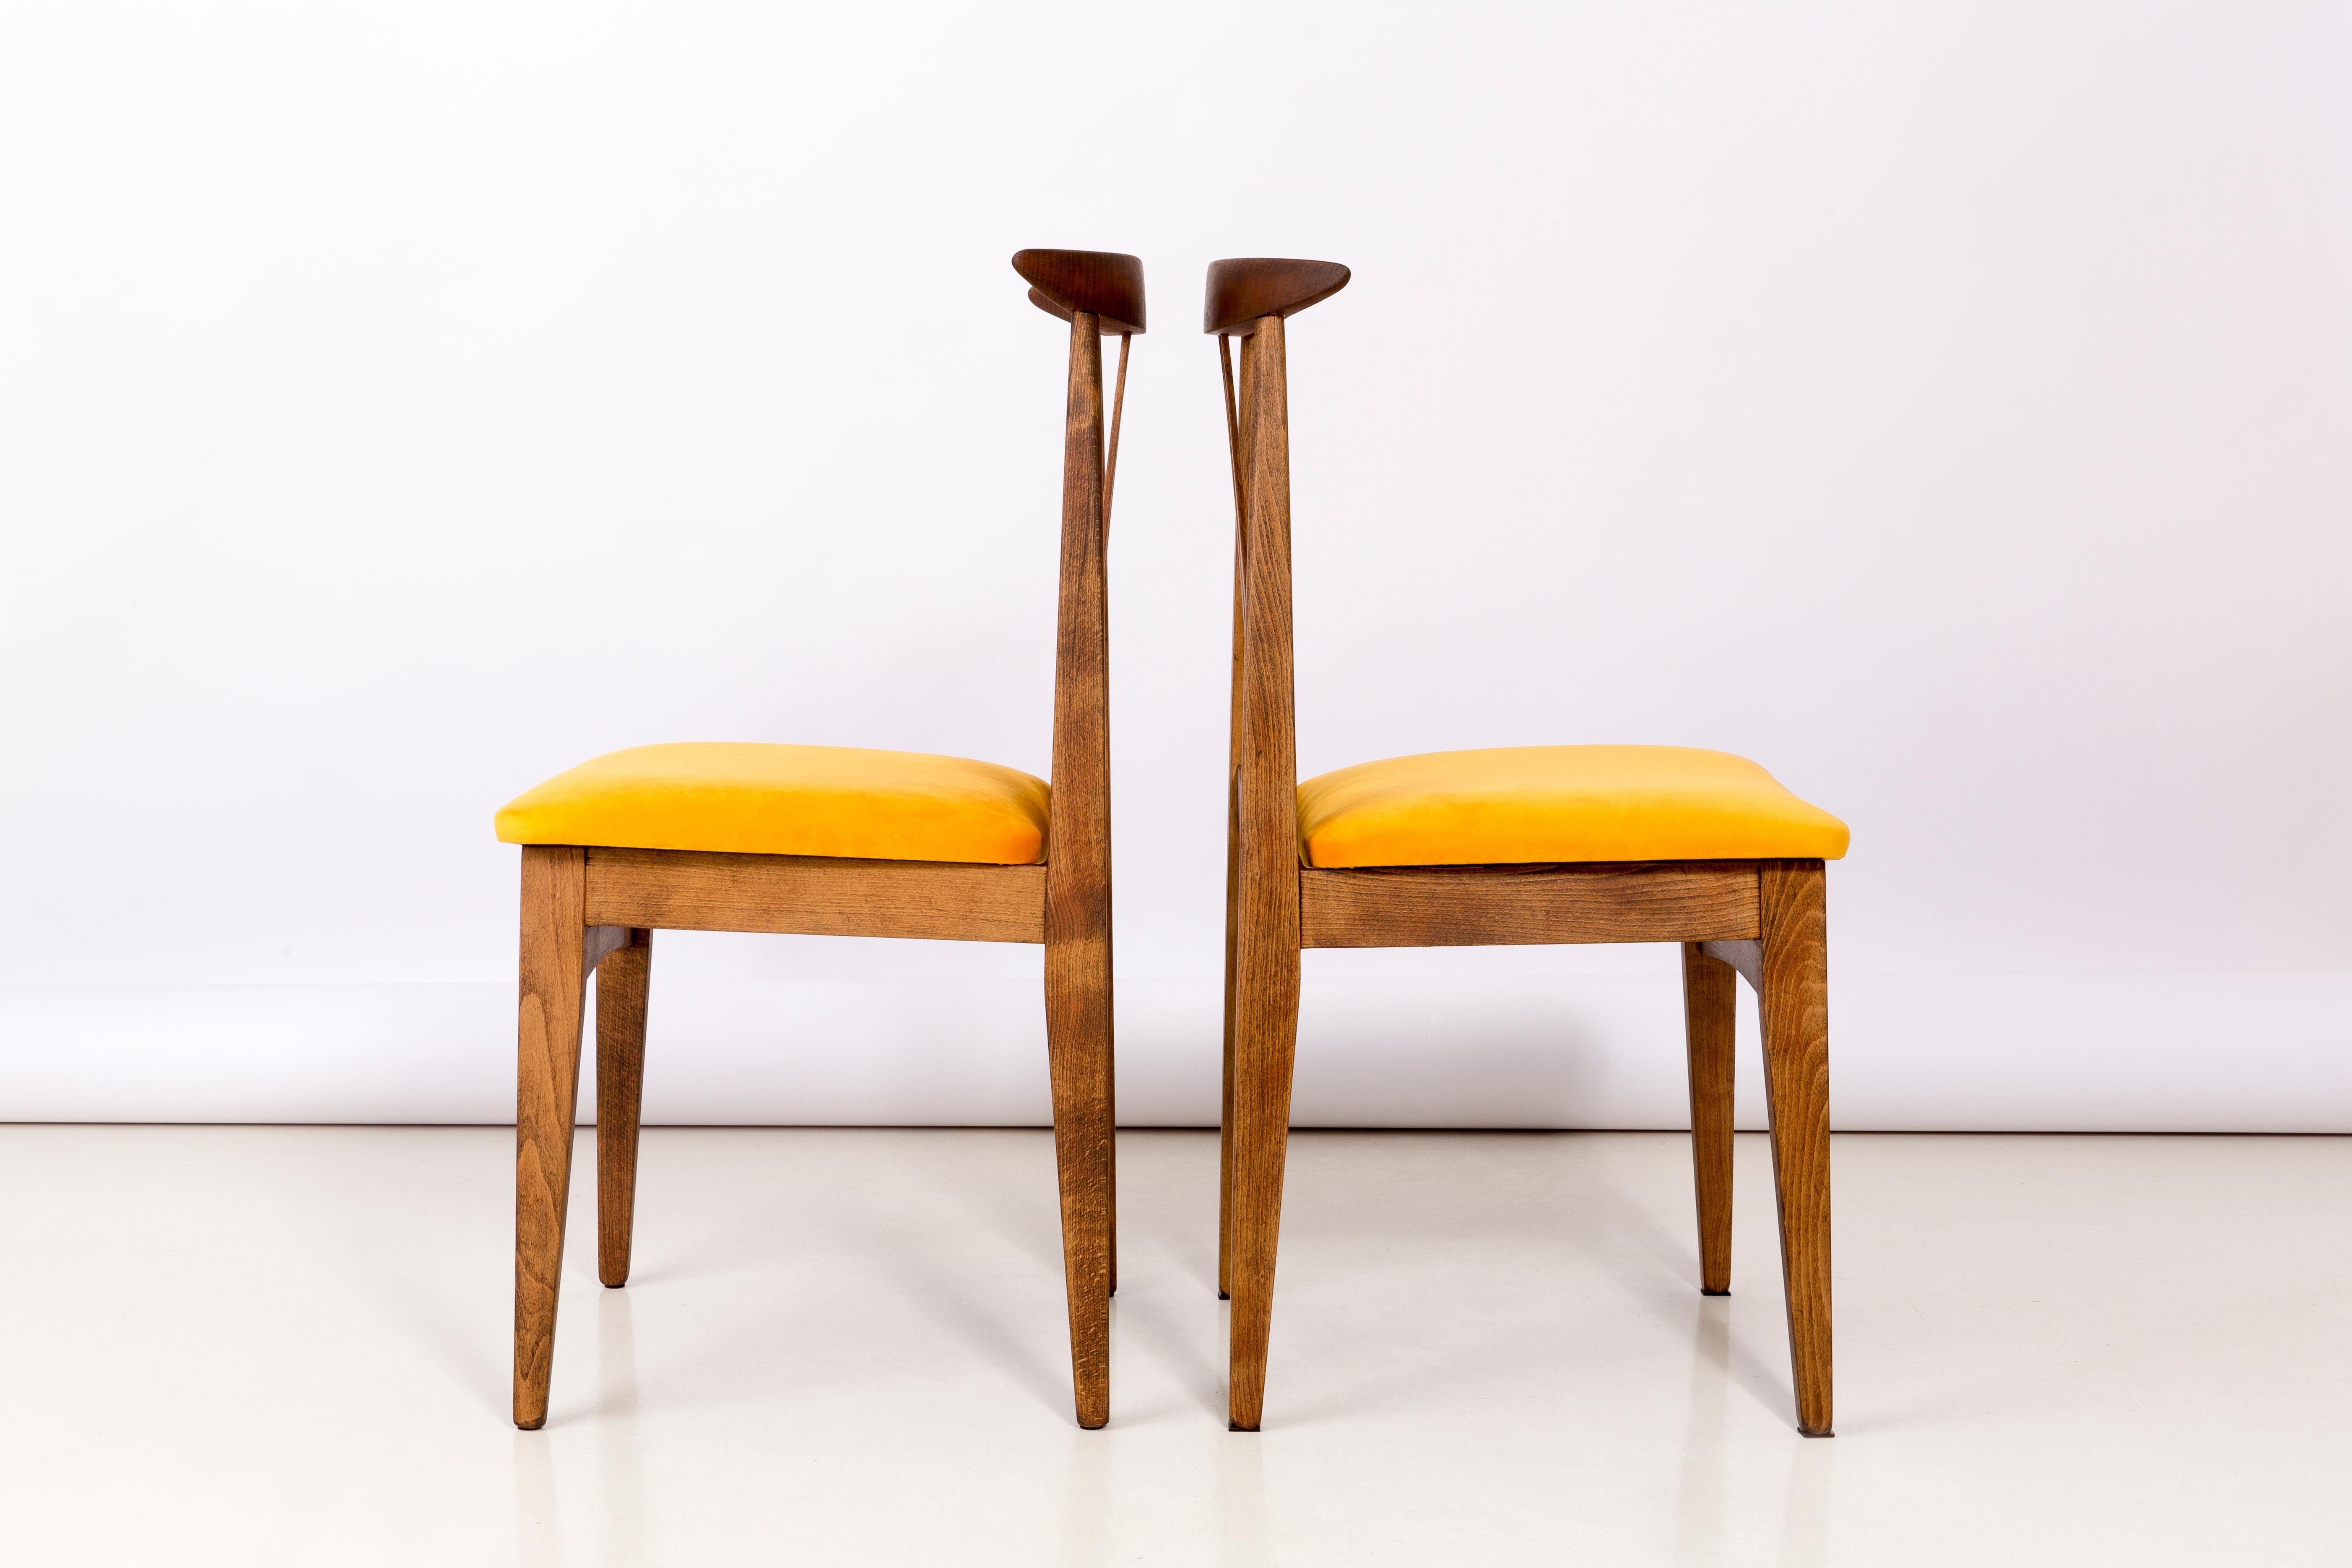 Hand-Crafted Set of Eight Yellow Chairs, by Zielinski, Europe, 1960s For Sale